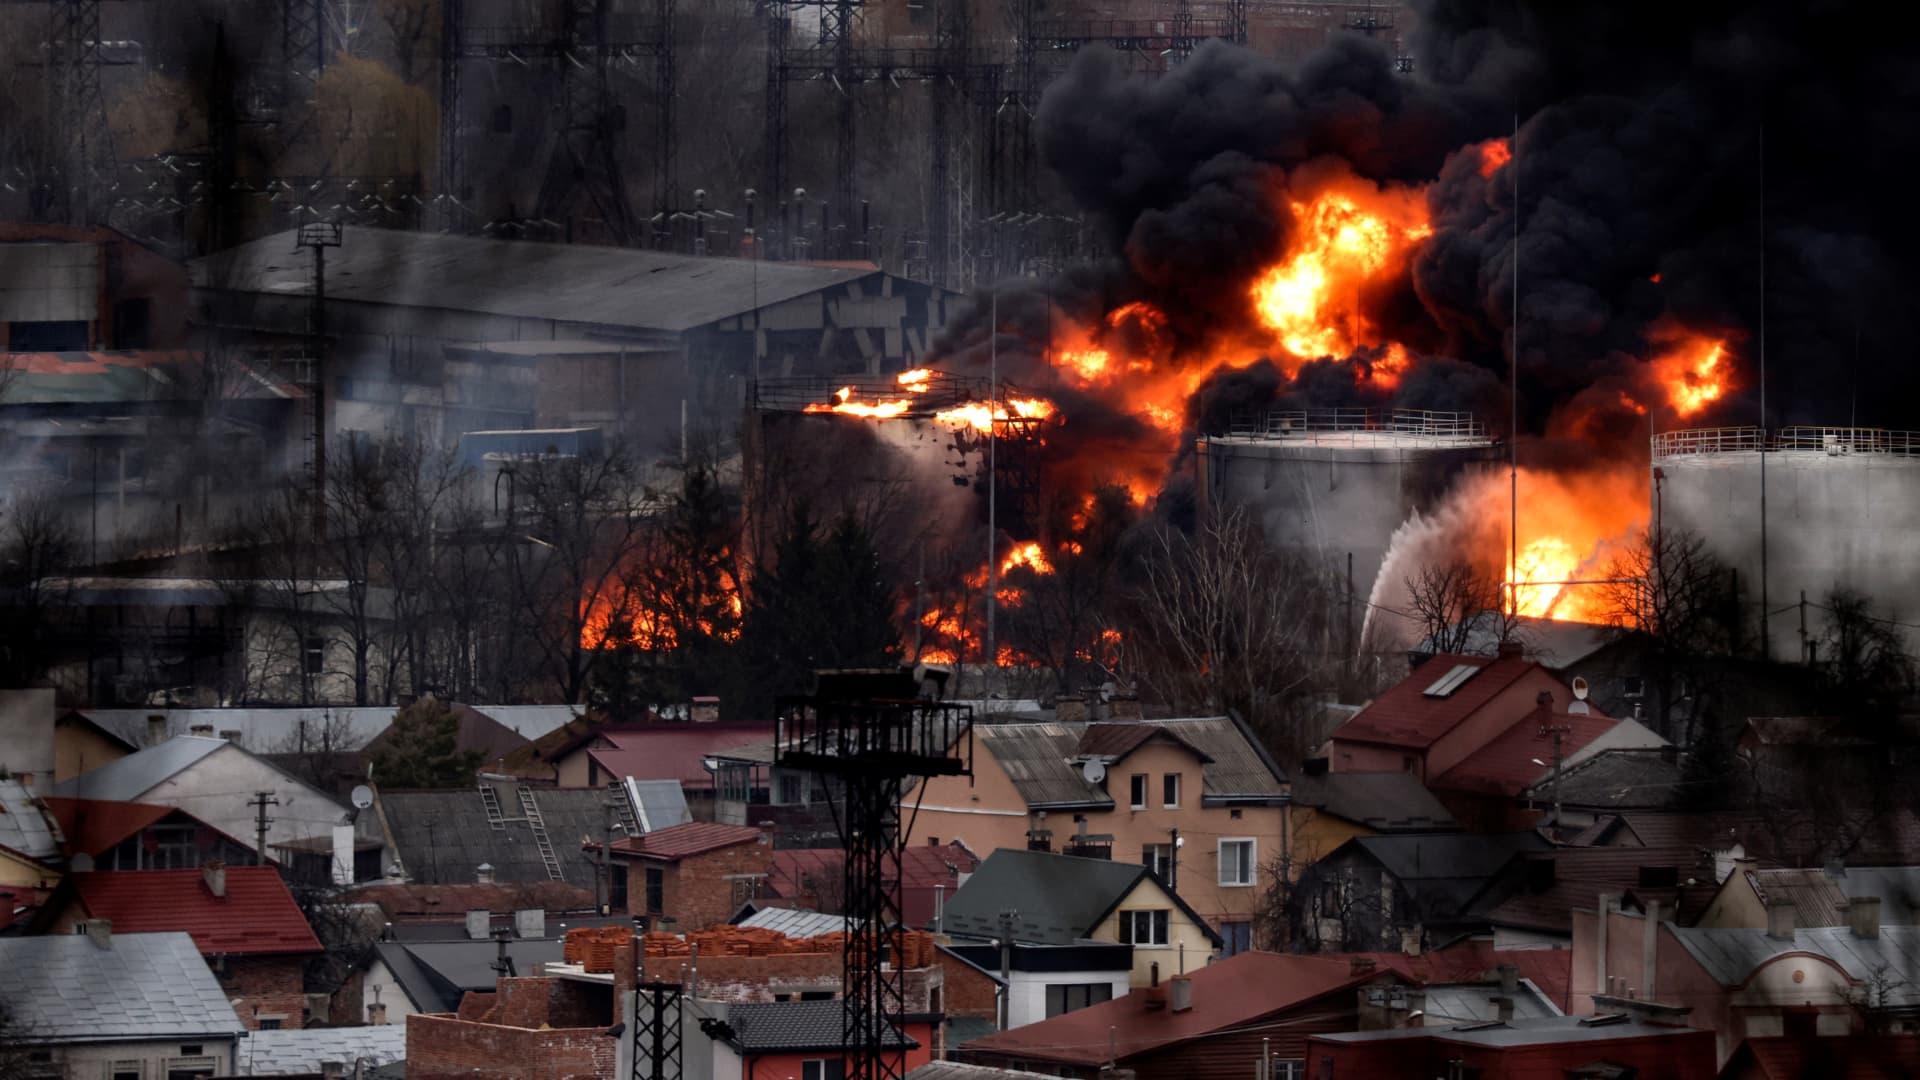 Dark smoke and flames rise from a fire following an air strike in the western Ukrainian city of Lviv, on March 26, 2022.